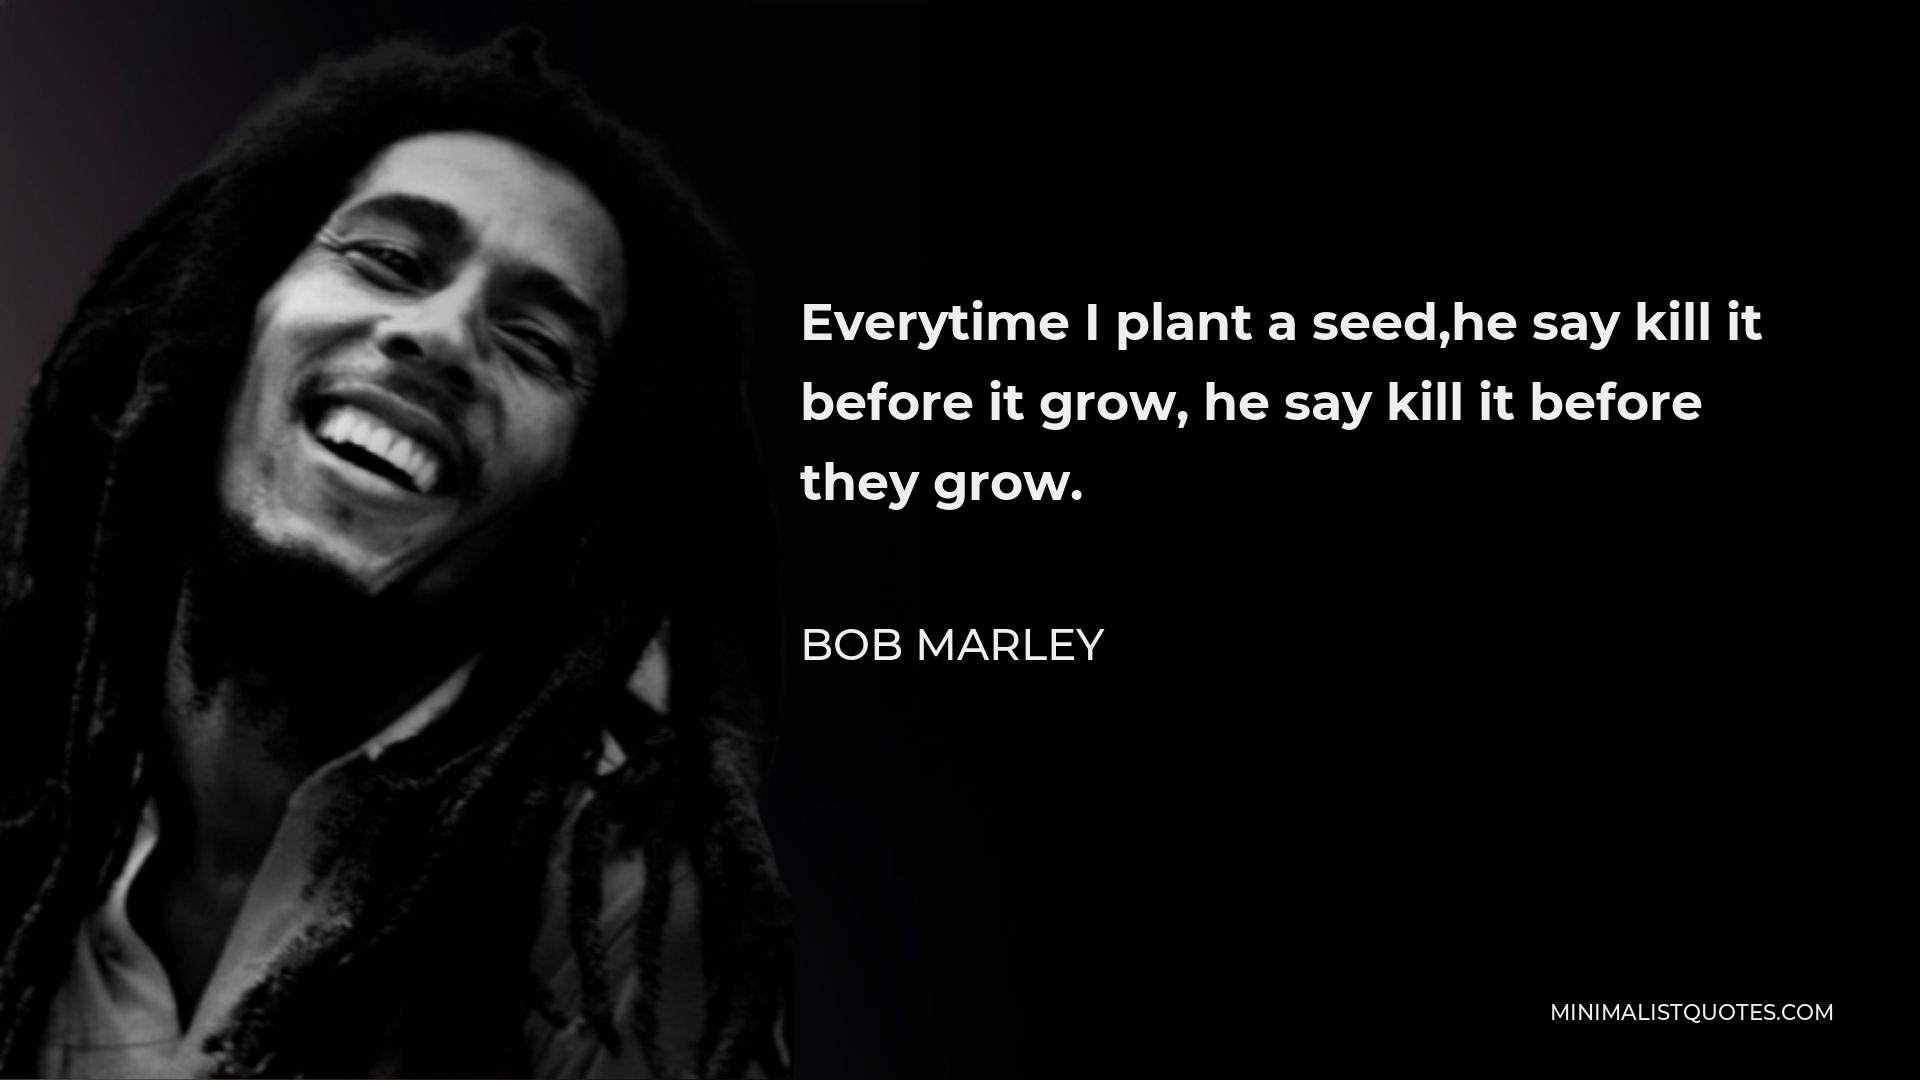 Bob Marley Quote - Everytime I plant a seed,he say kill it before it grow, he say kill it before they grow.